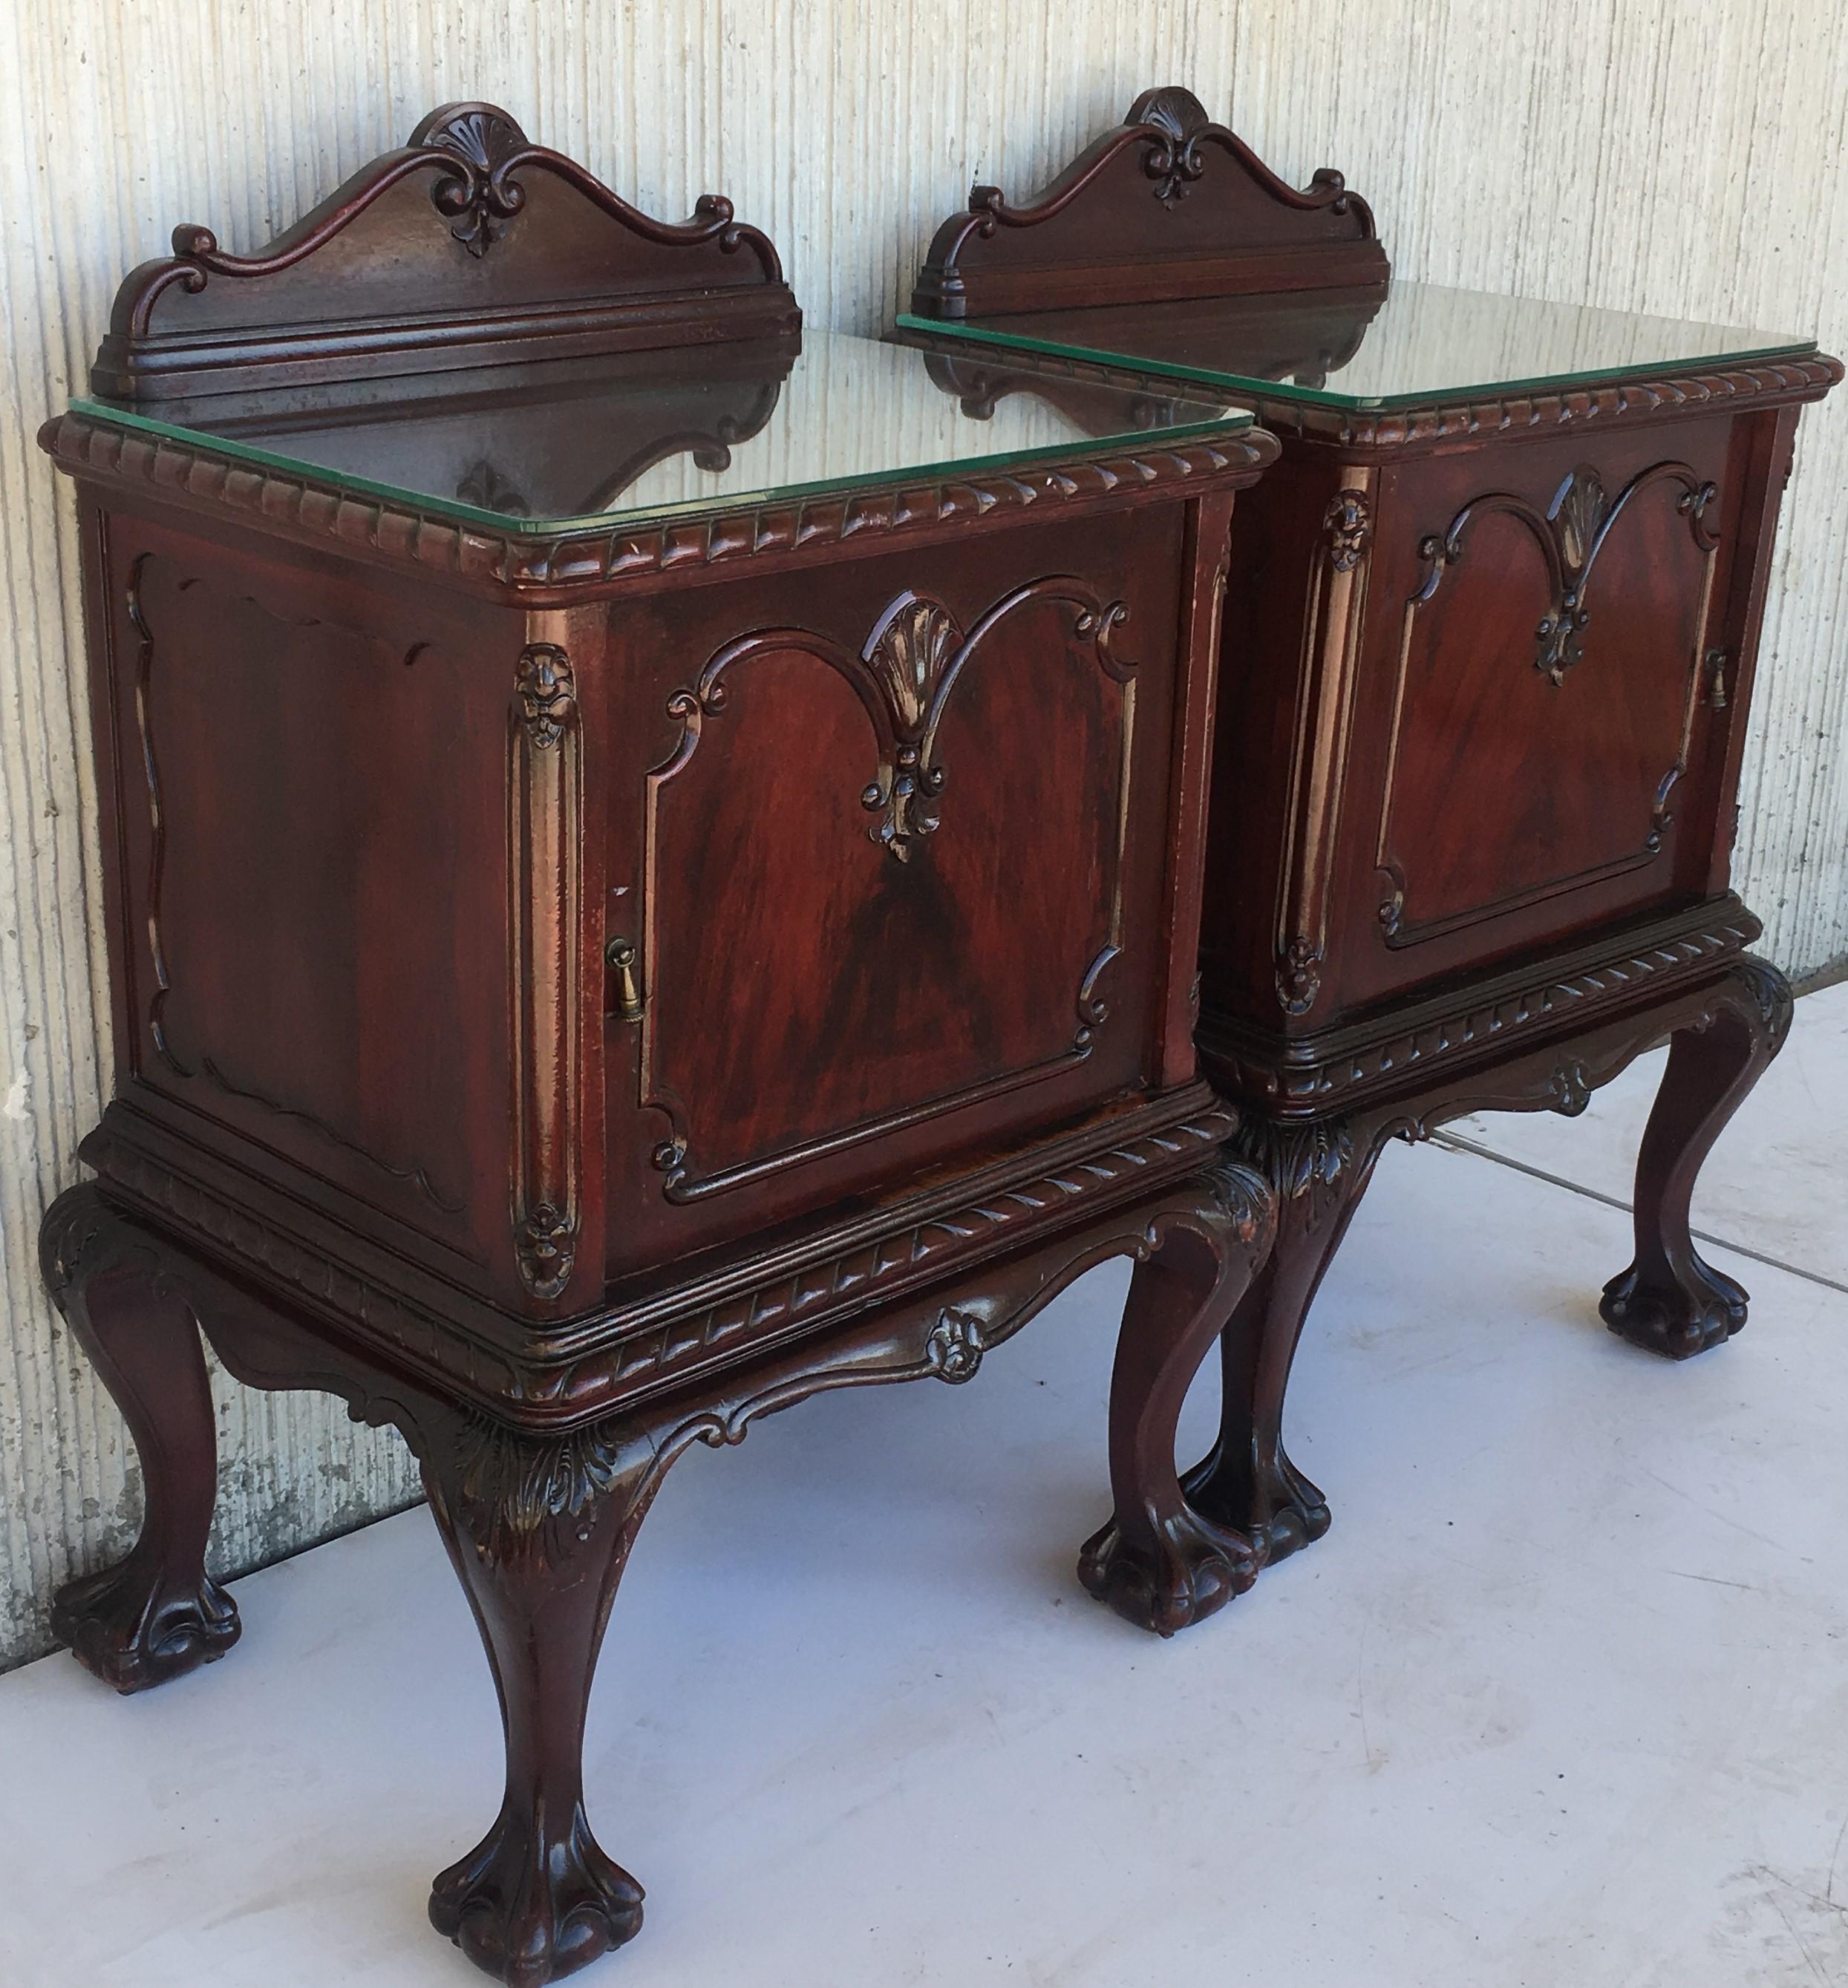 A good George III period walnut pair of nightstands, with well carved uprights top and bottom with anthemion detailing, exceptionally highly figured timbers to the fronts and very well carved hairy paw feet.
You can remove the crest easily ( table